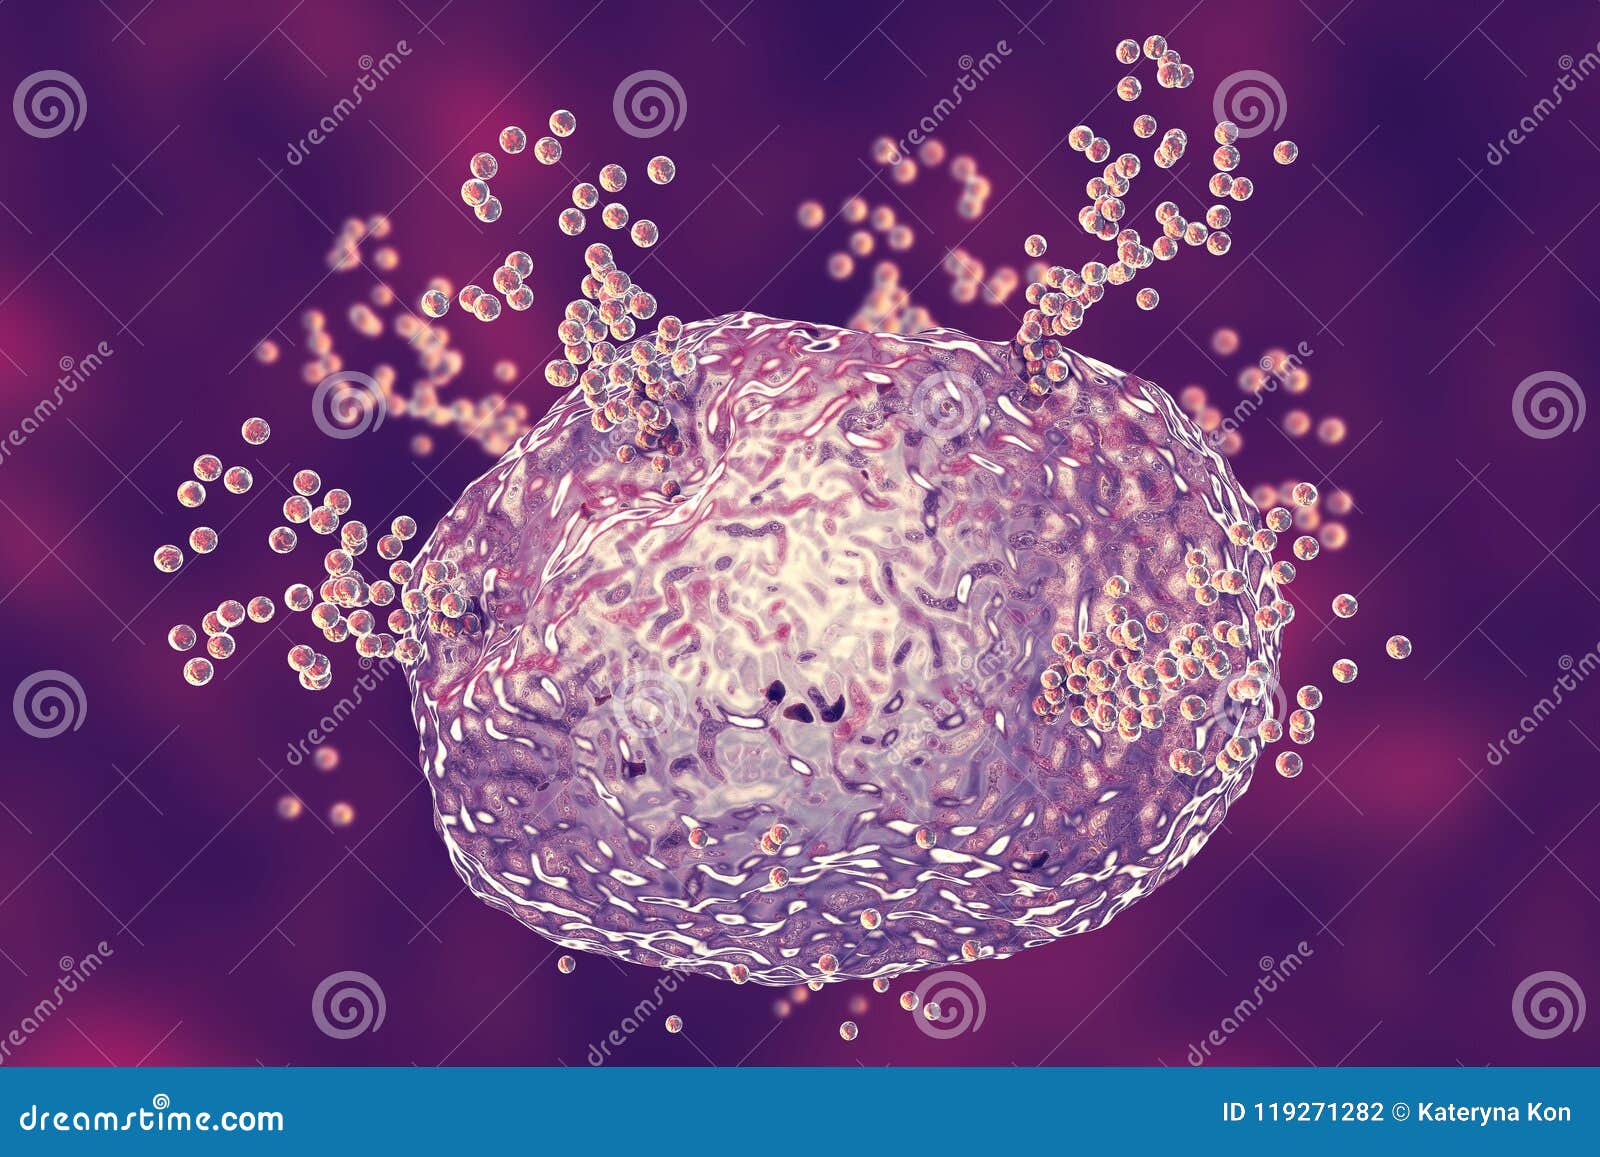 mast cell releasing histamine